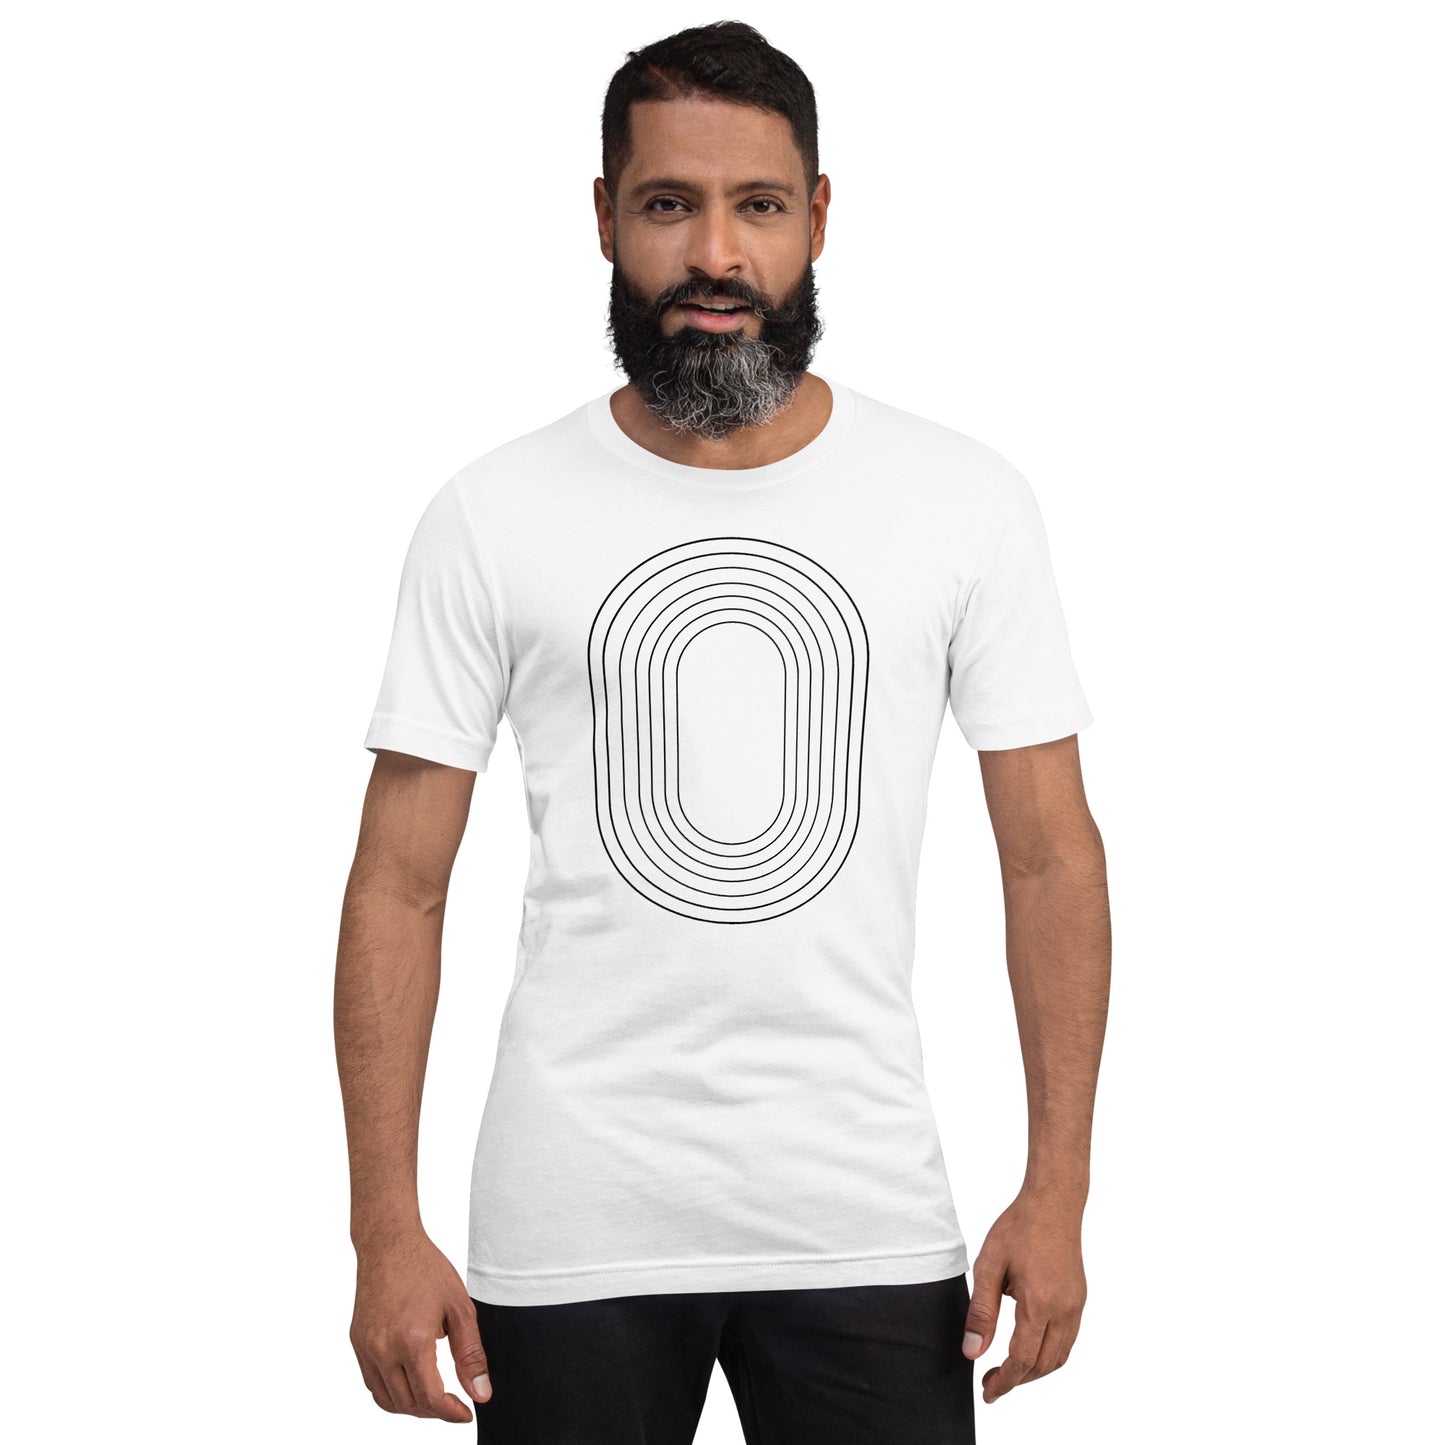 Track Oval Tee - White